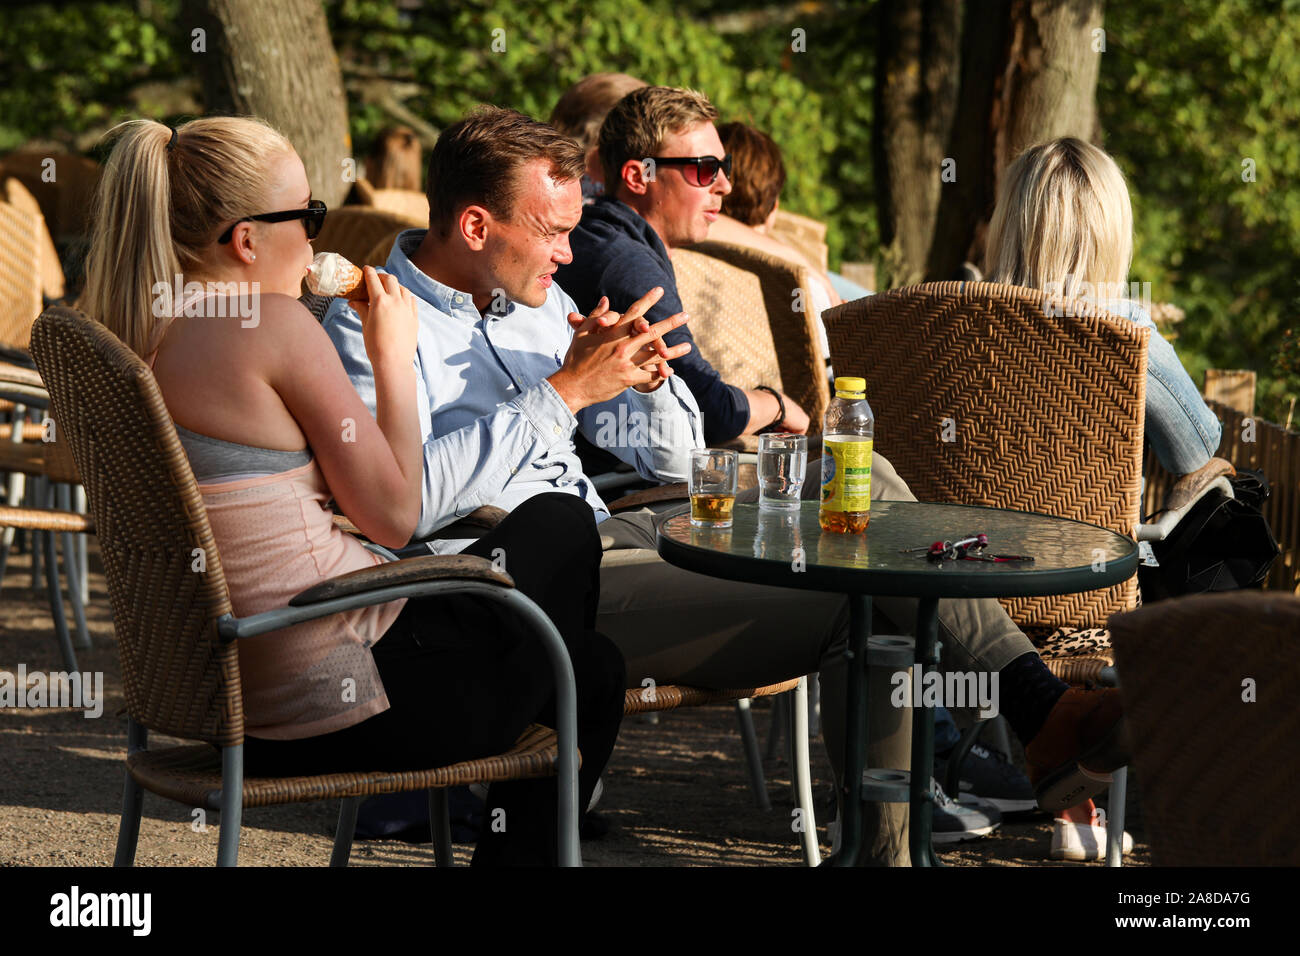 People basking in evening sun enjoying beverages at open-air cafe Stock Photo